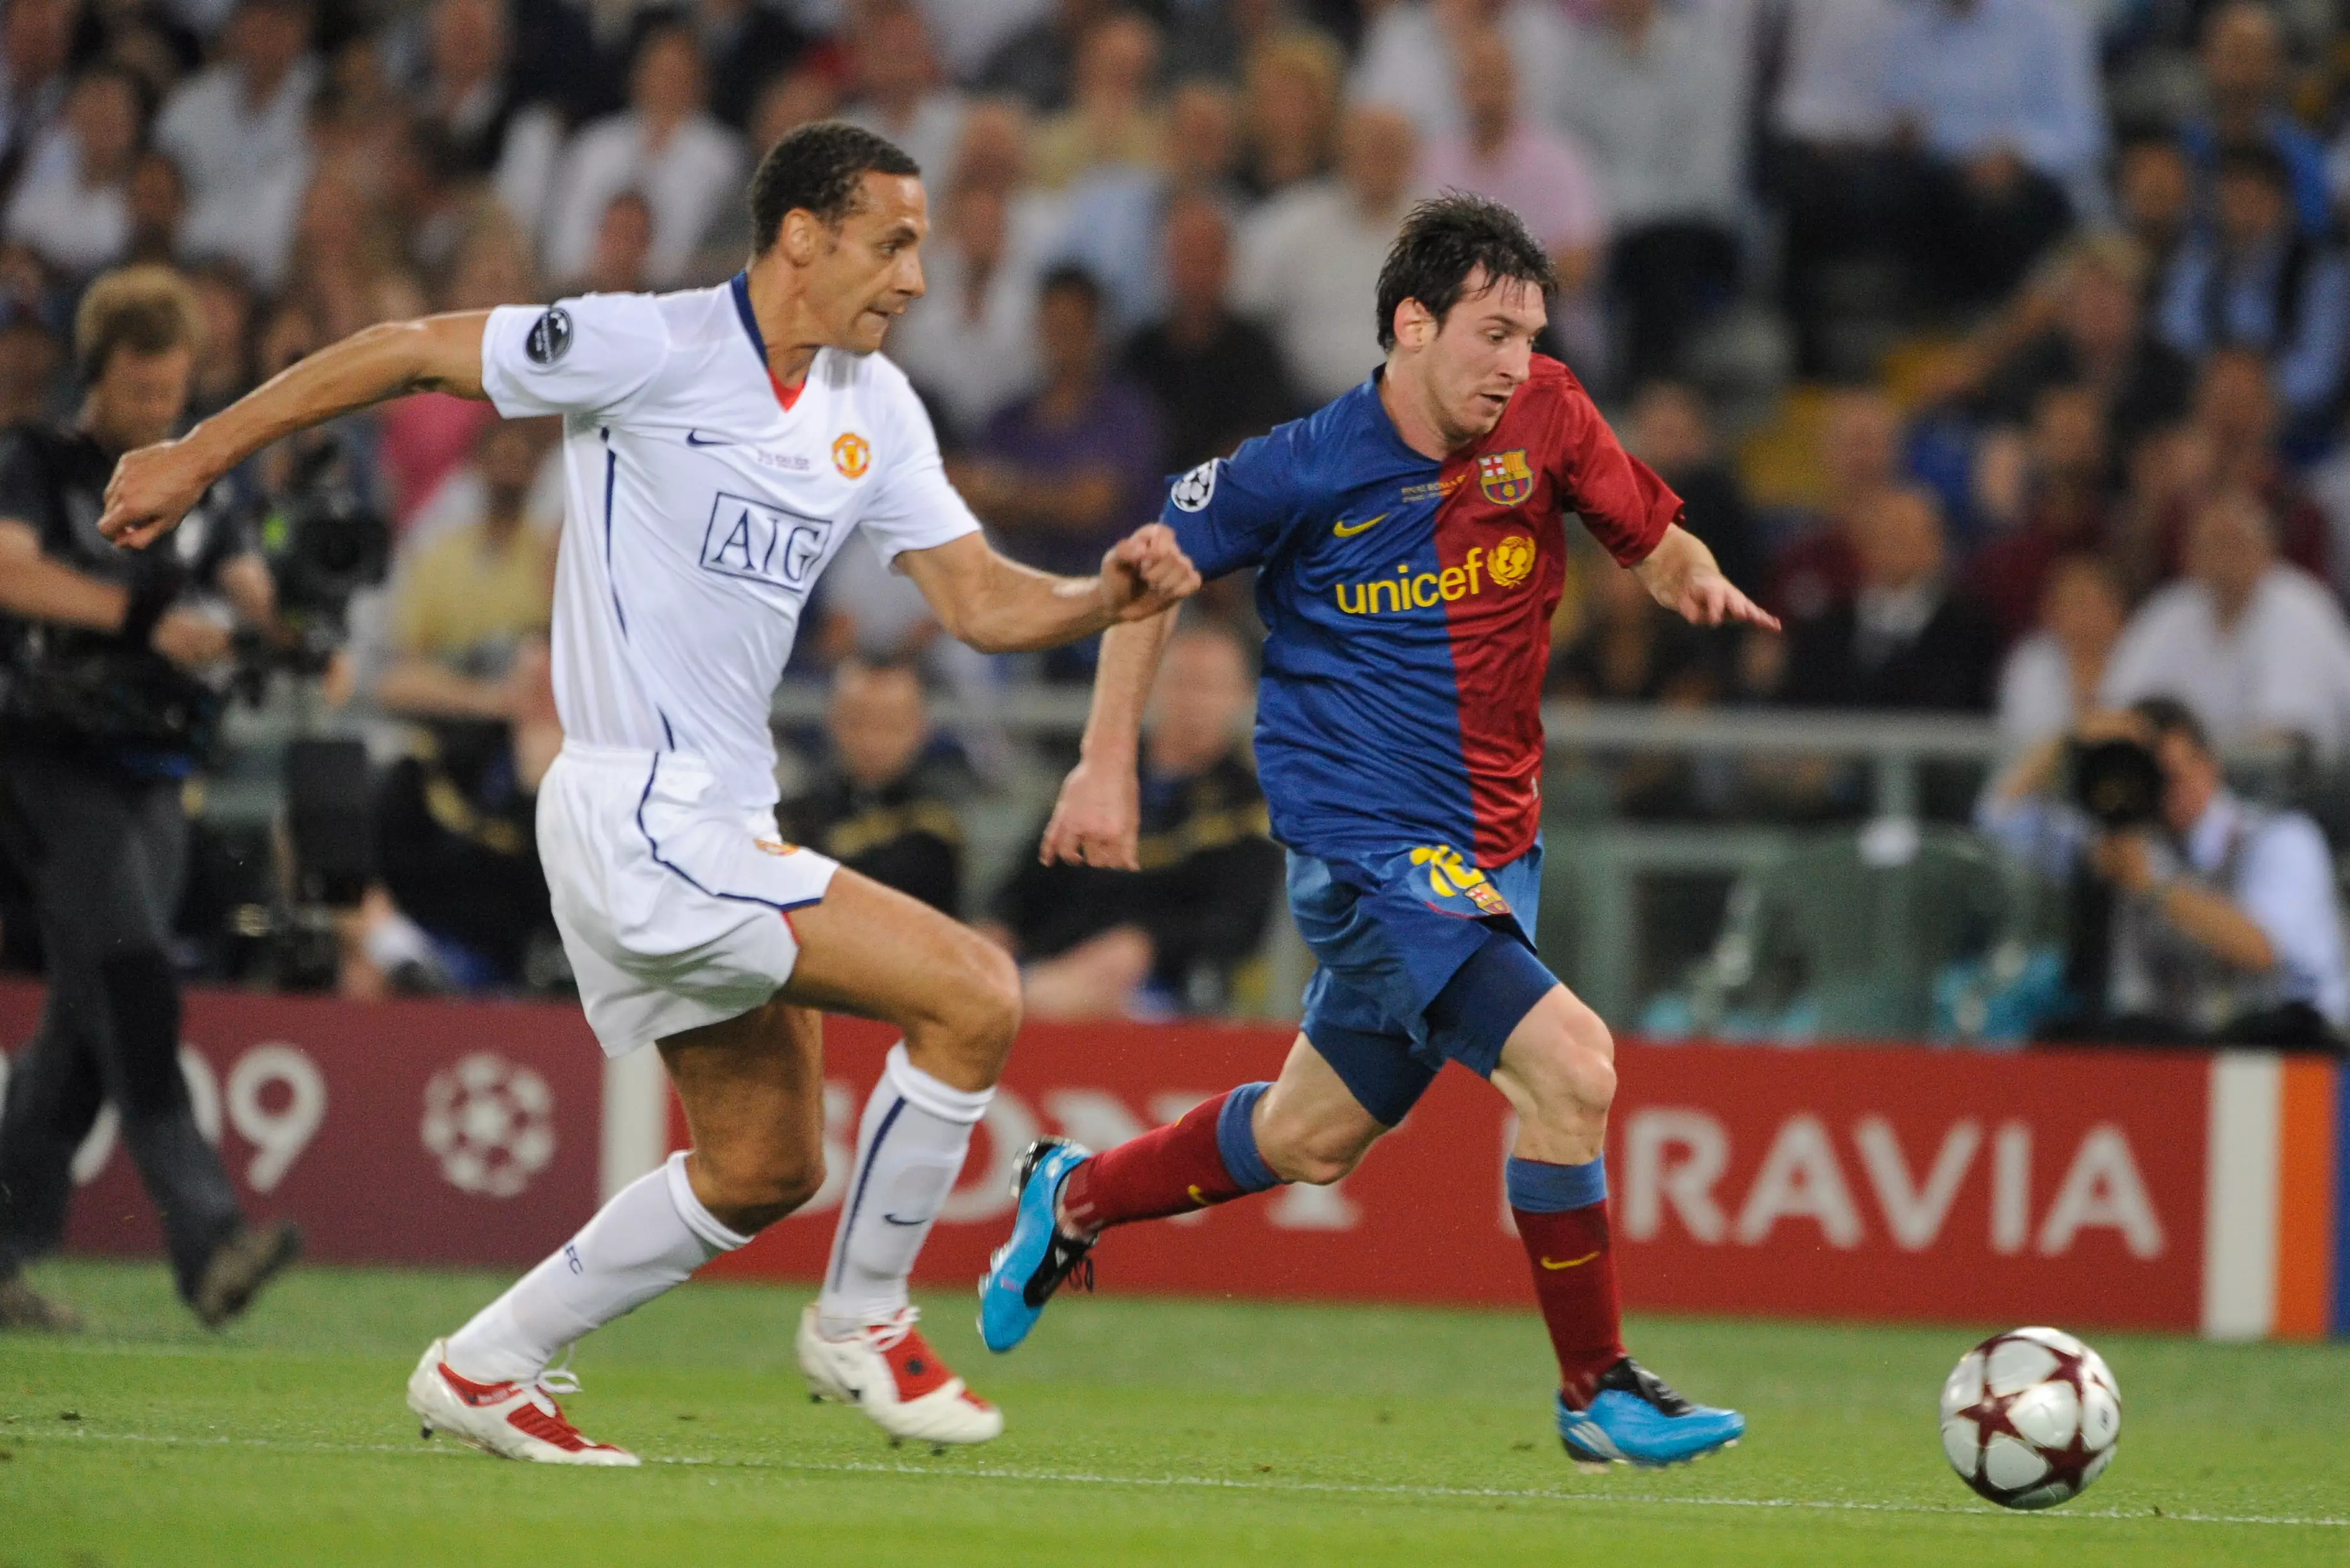 Messi in action against United. Image: PA